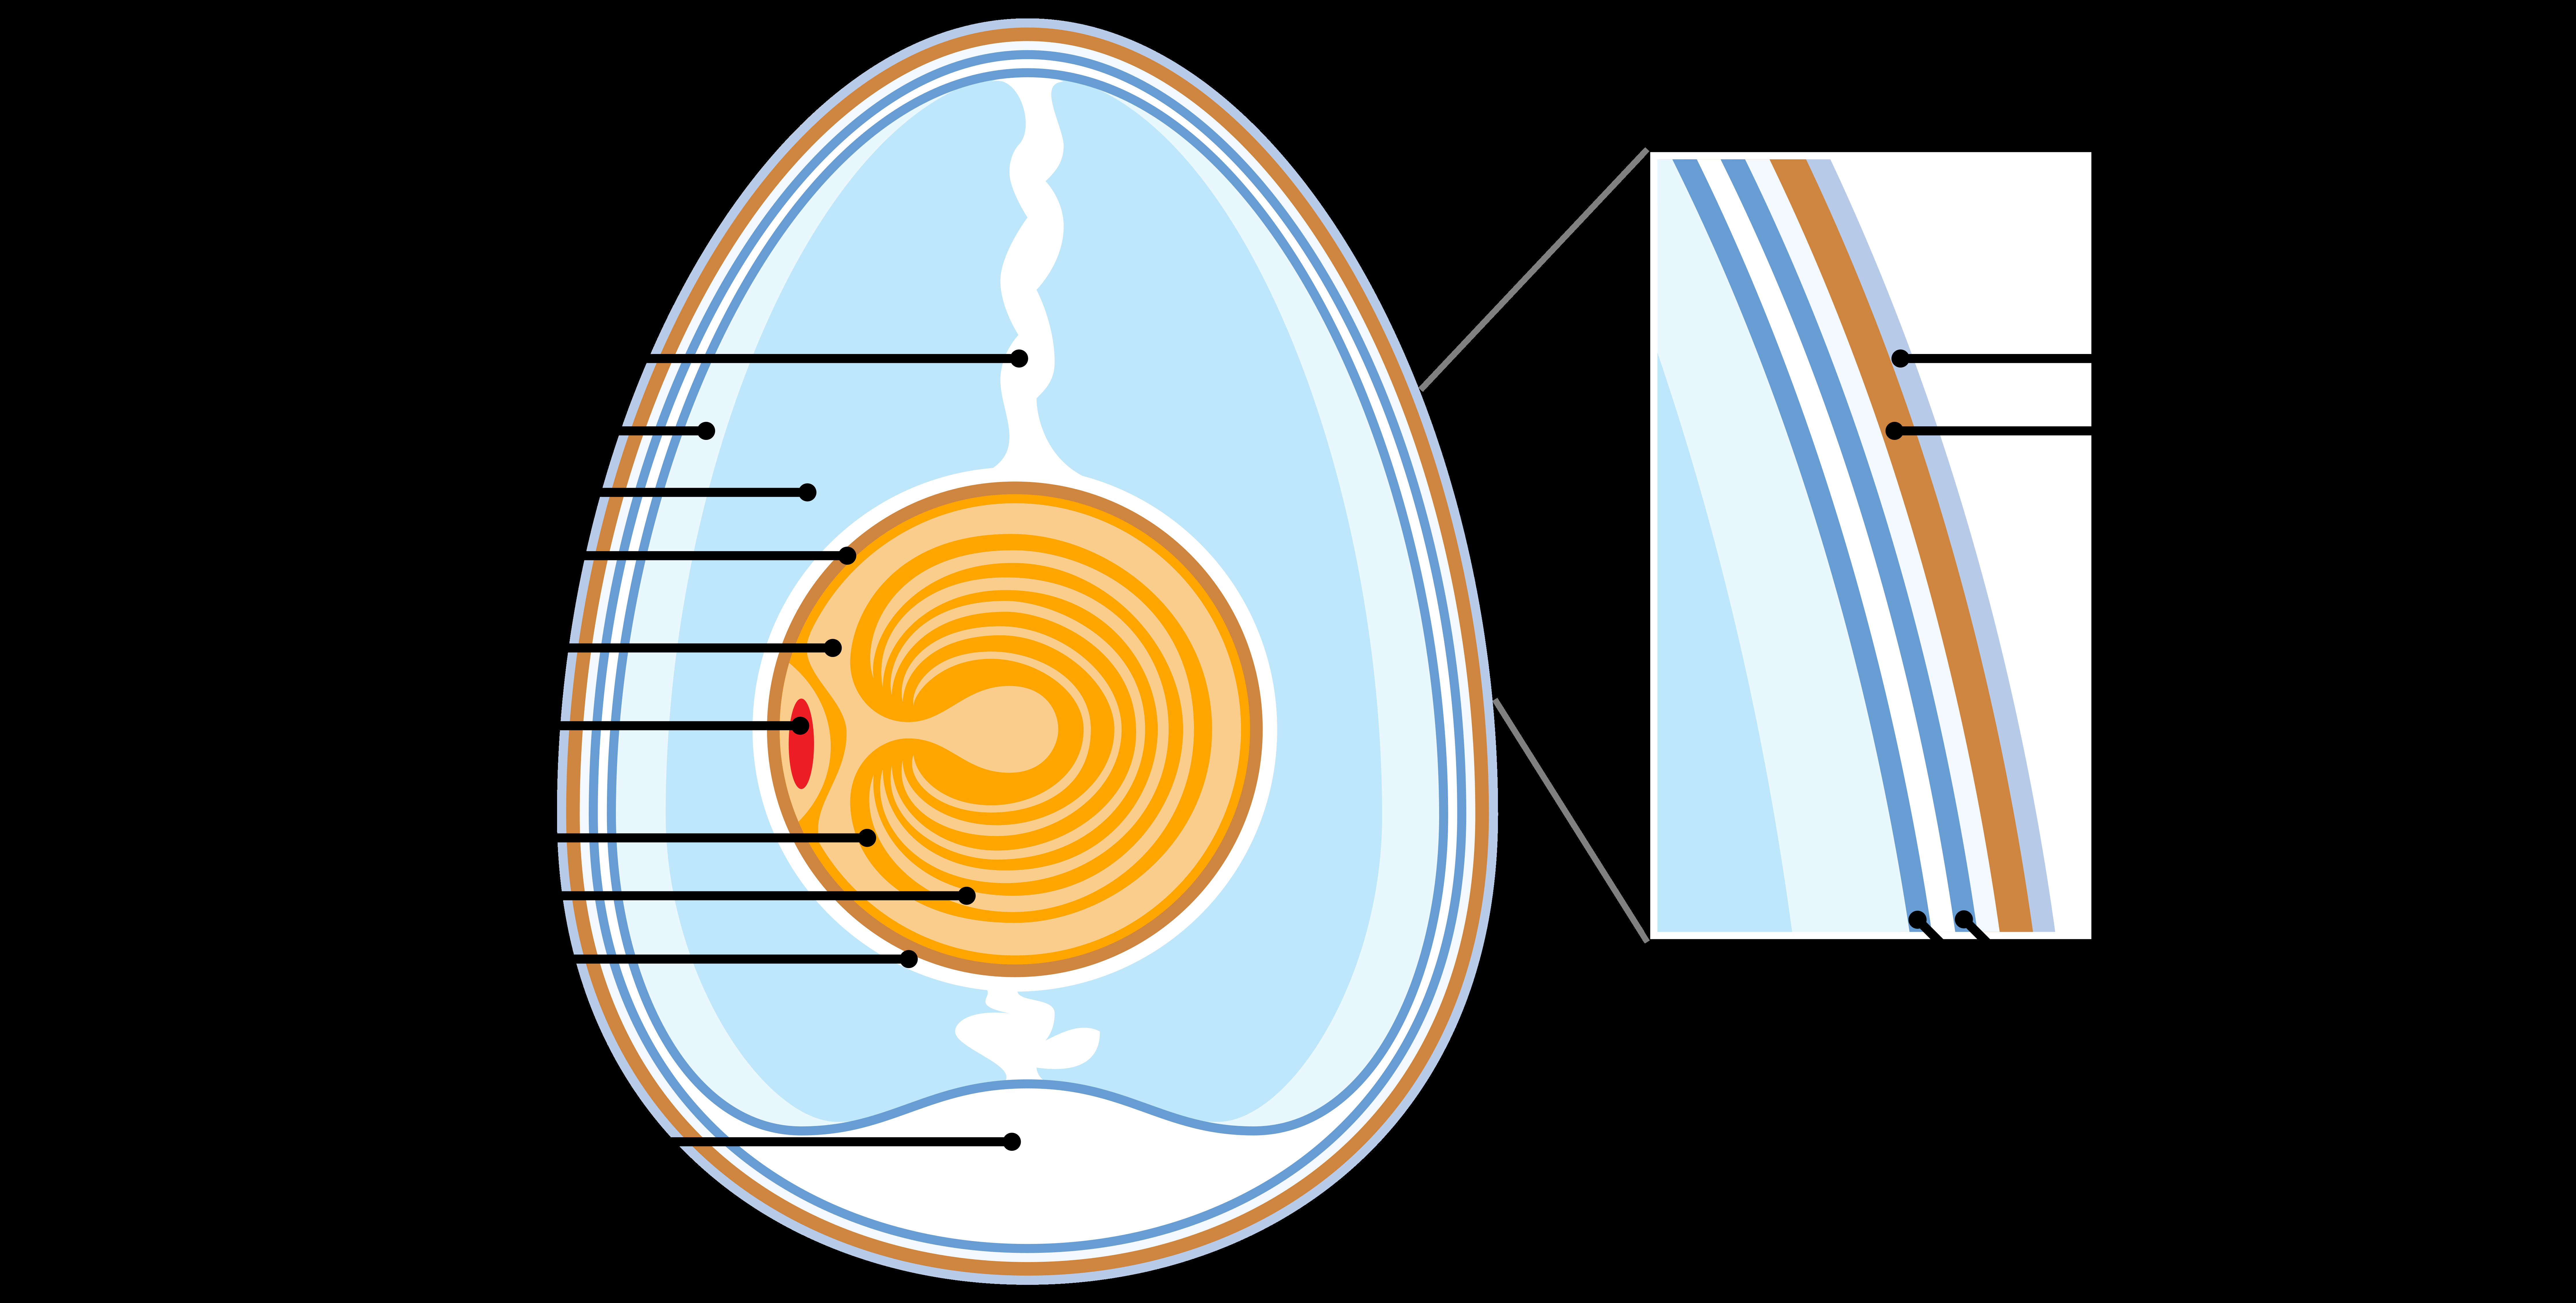 Amniotic Egg Diagram Fileanatomy Of An Amiotic Egg Labeledsvg Wikimedia Commons